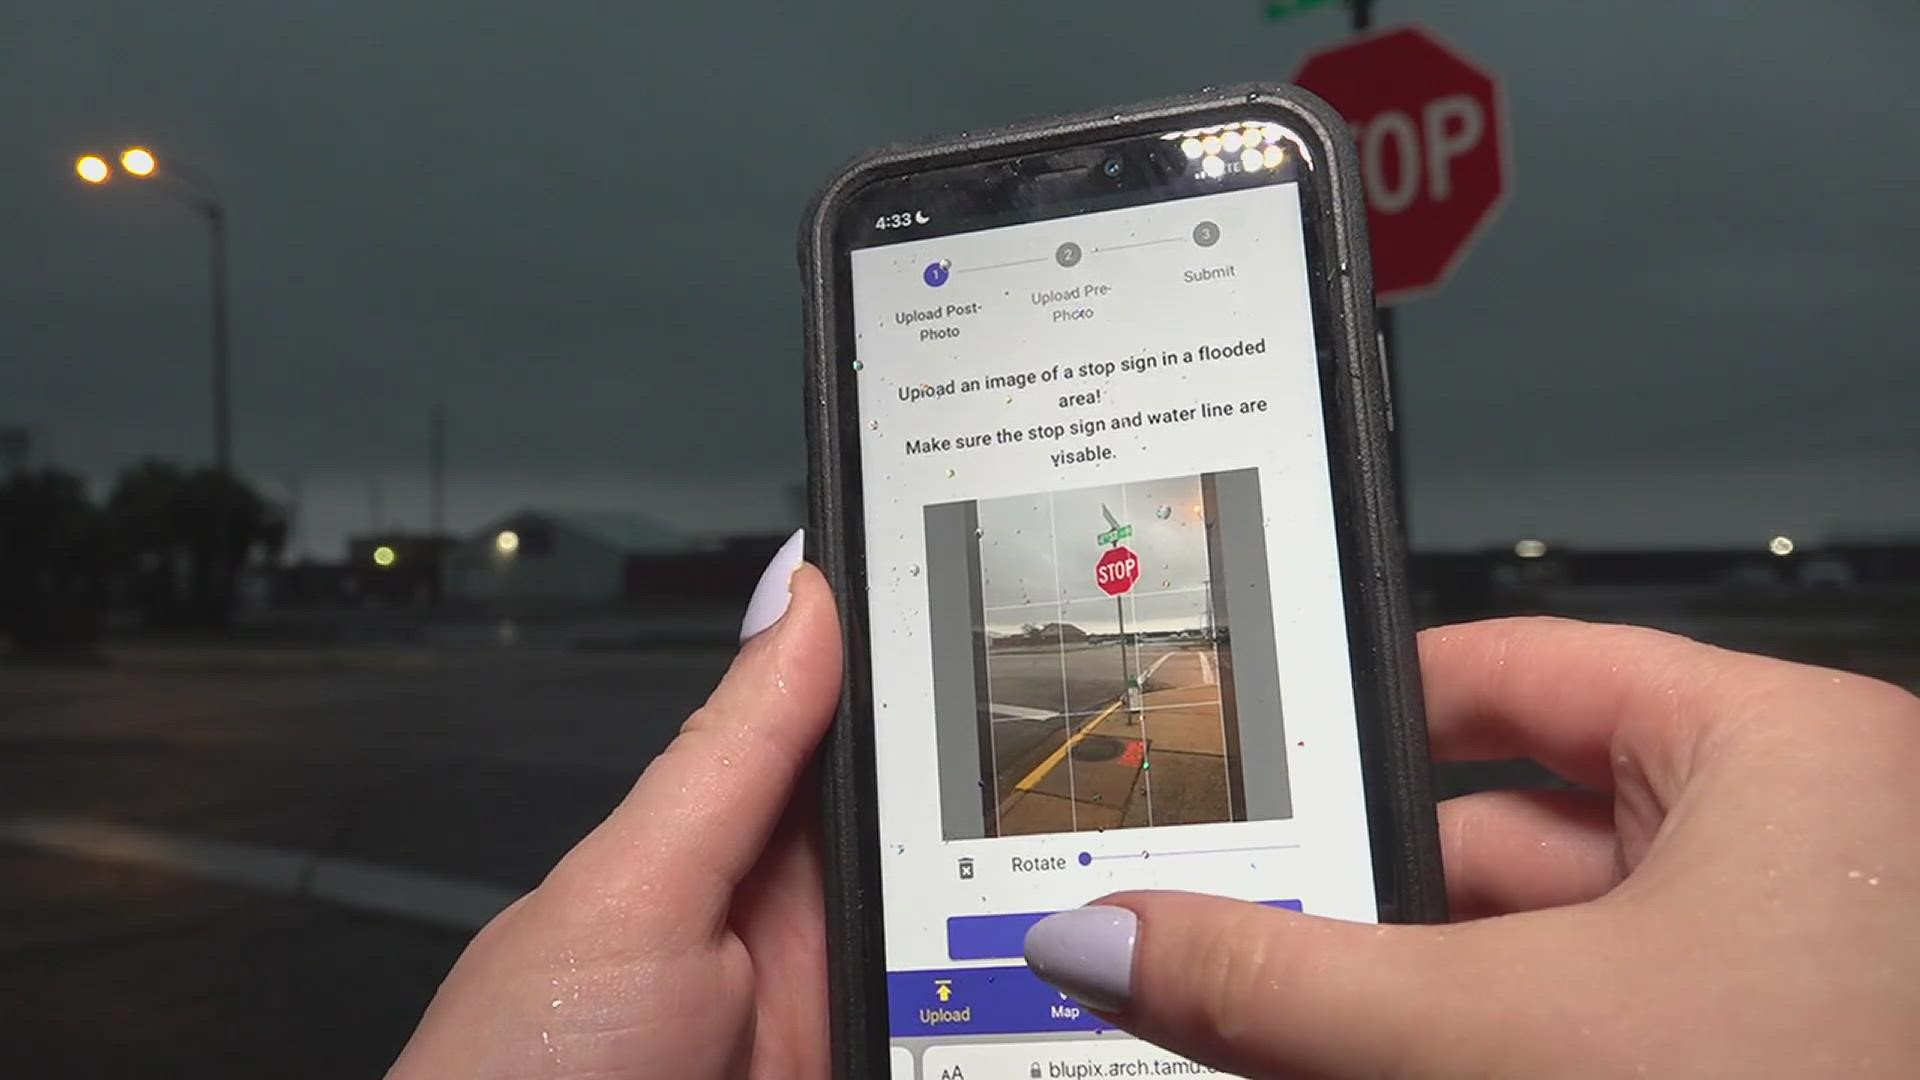 Dr. Amir H. Behzadan wants to use his app "Blupix" to provide precise, real-time information about flood levels in Port Arthur to residents and first responders.